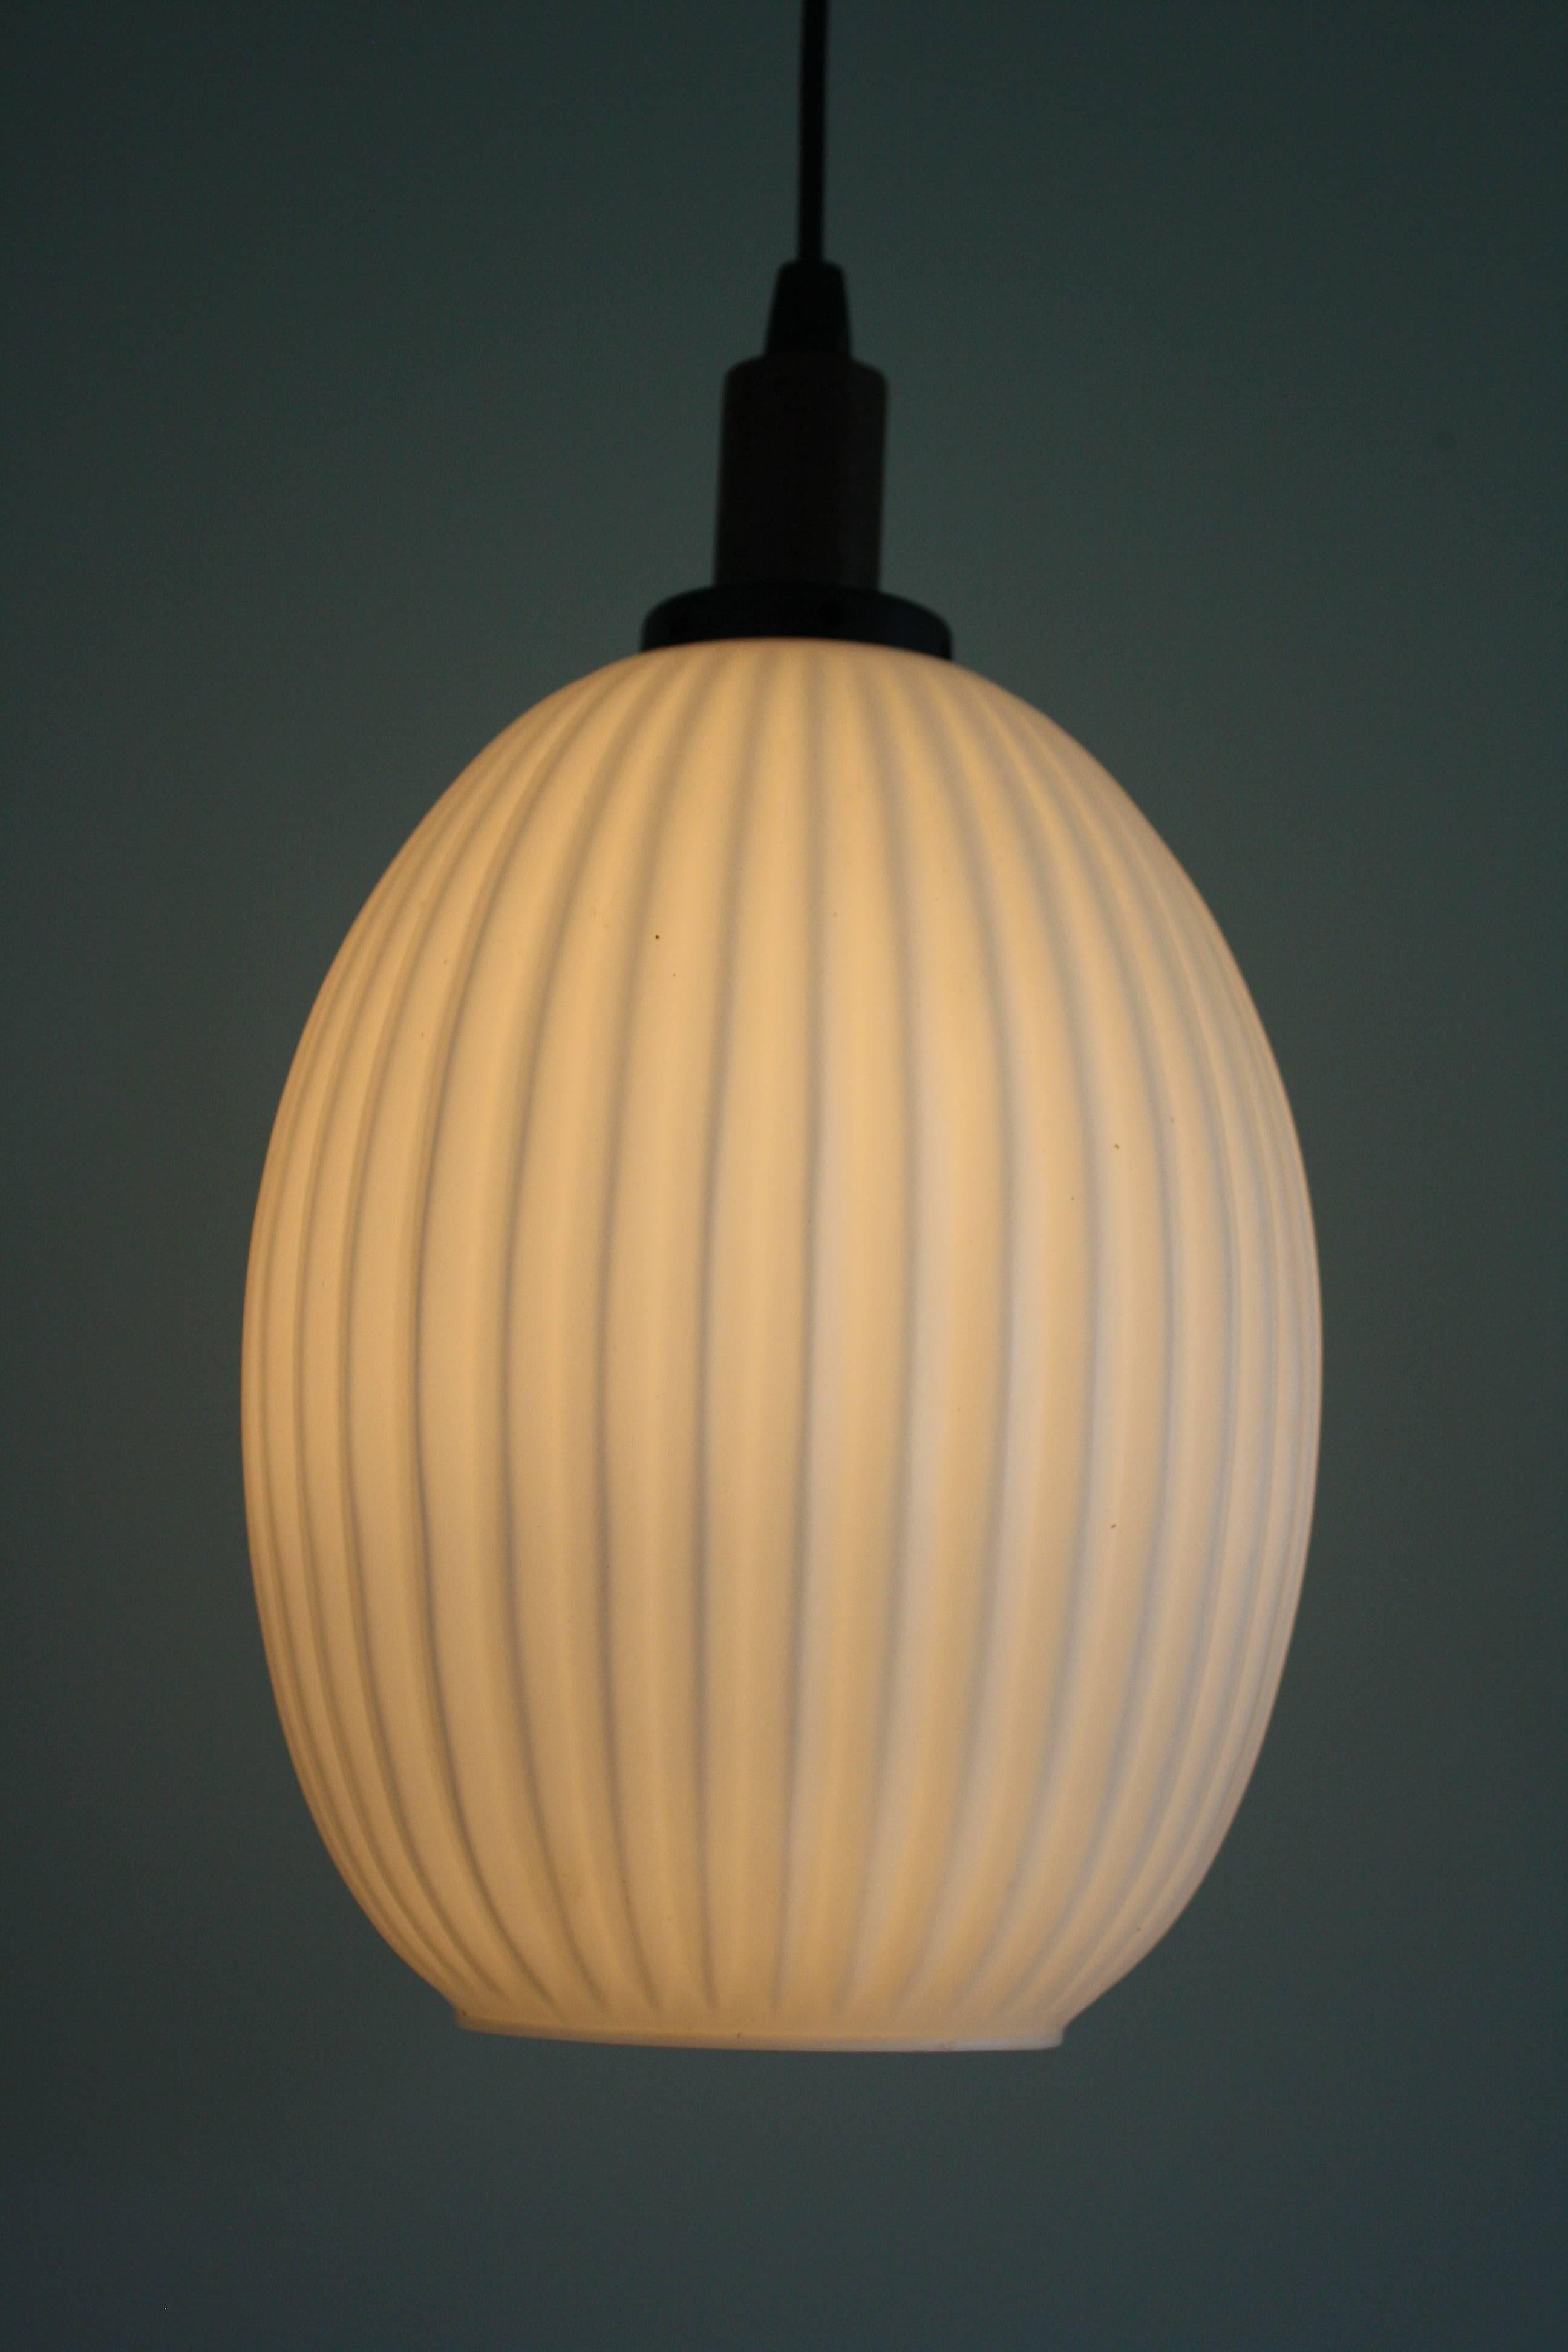 Charming Mid-Century ribbed pendant light.
It features a milk glass shade with a teak shade holder,

1960s, Denmark

Perfect condition. 
Tested and ready to use.

Measures: Height 32 cm/12.60 inch
Diameter shade 20 cm/7.90 inch.